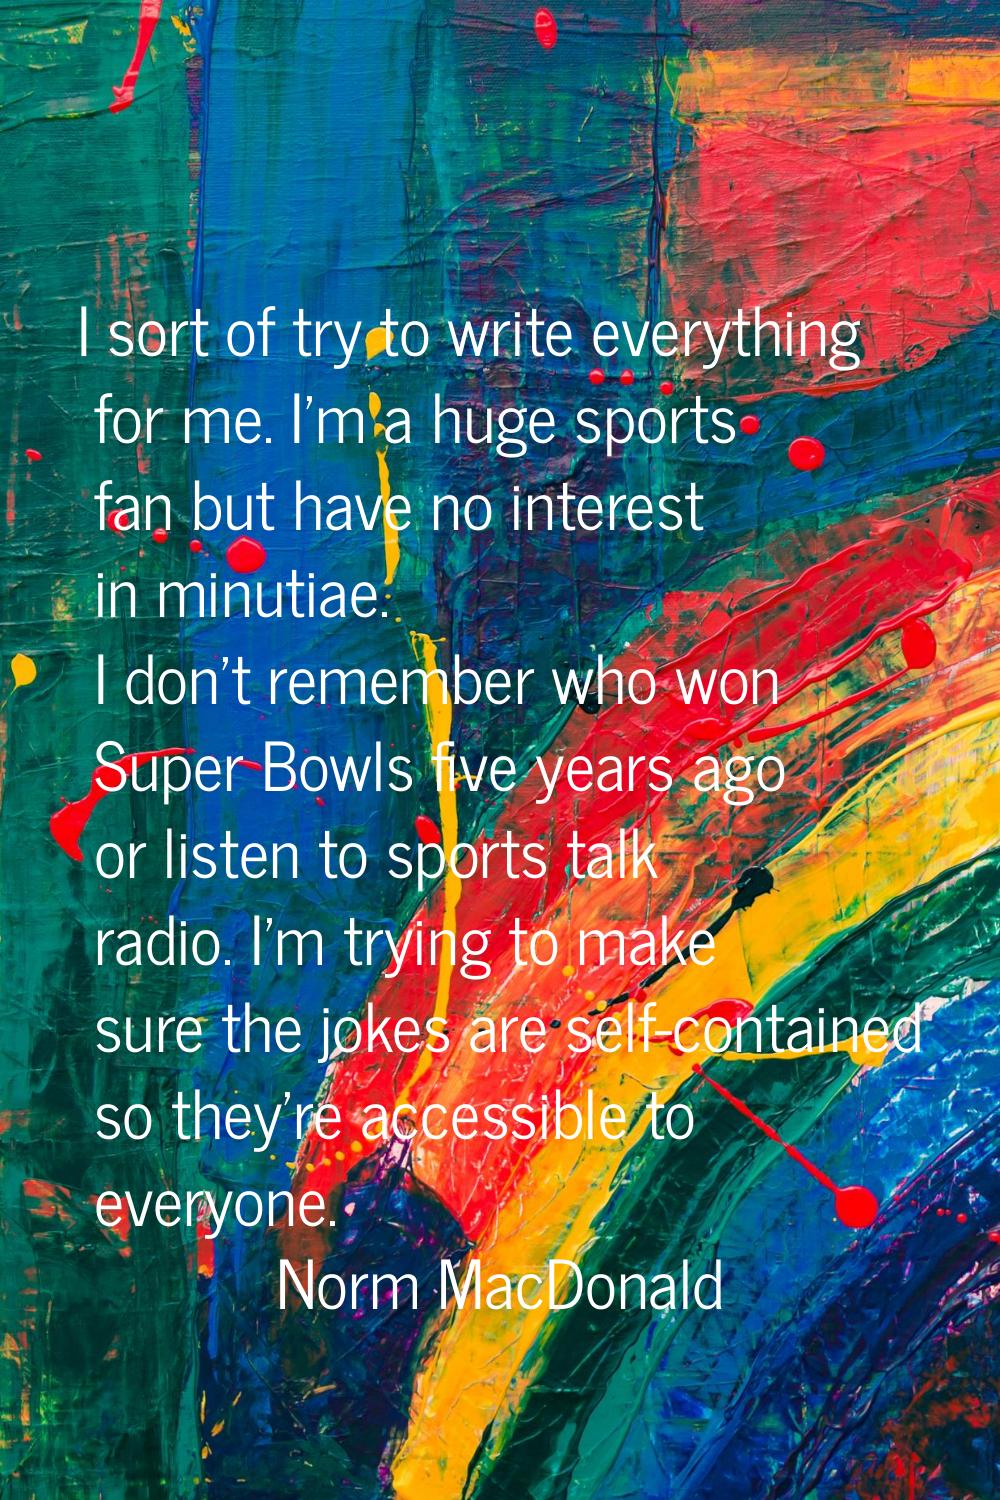 I sort of try to write everything for me. I'm a huge sports fan but have no interest in minutiae. I